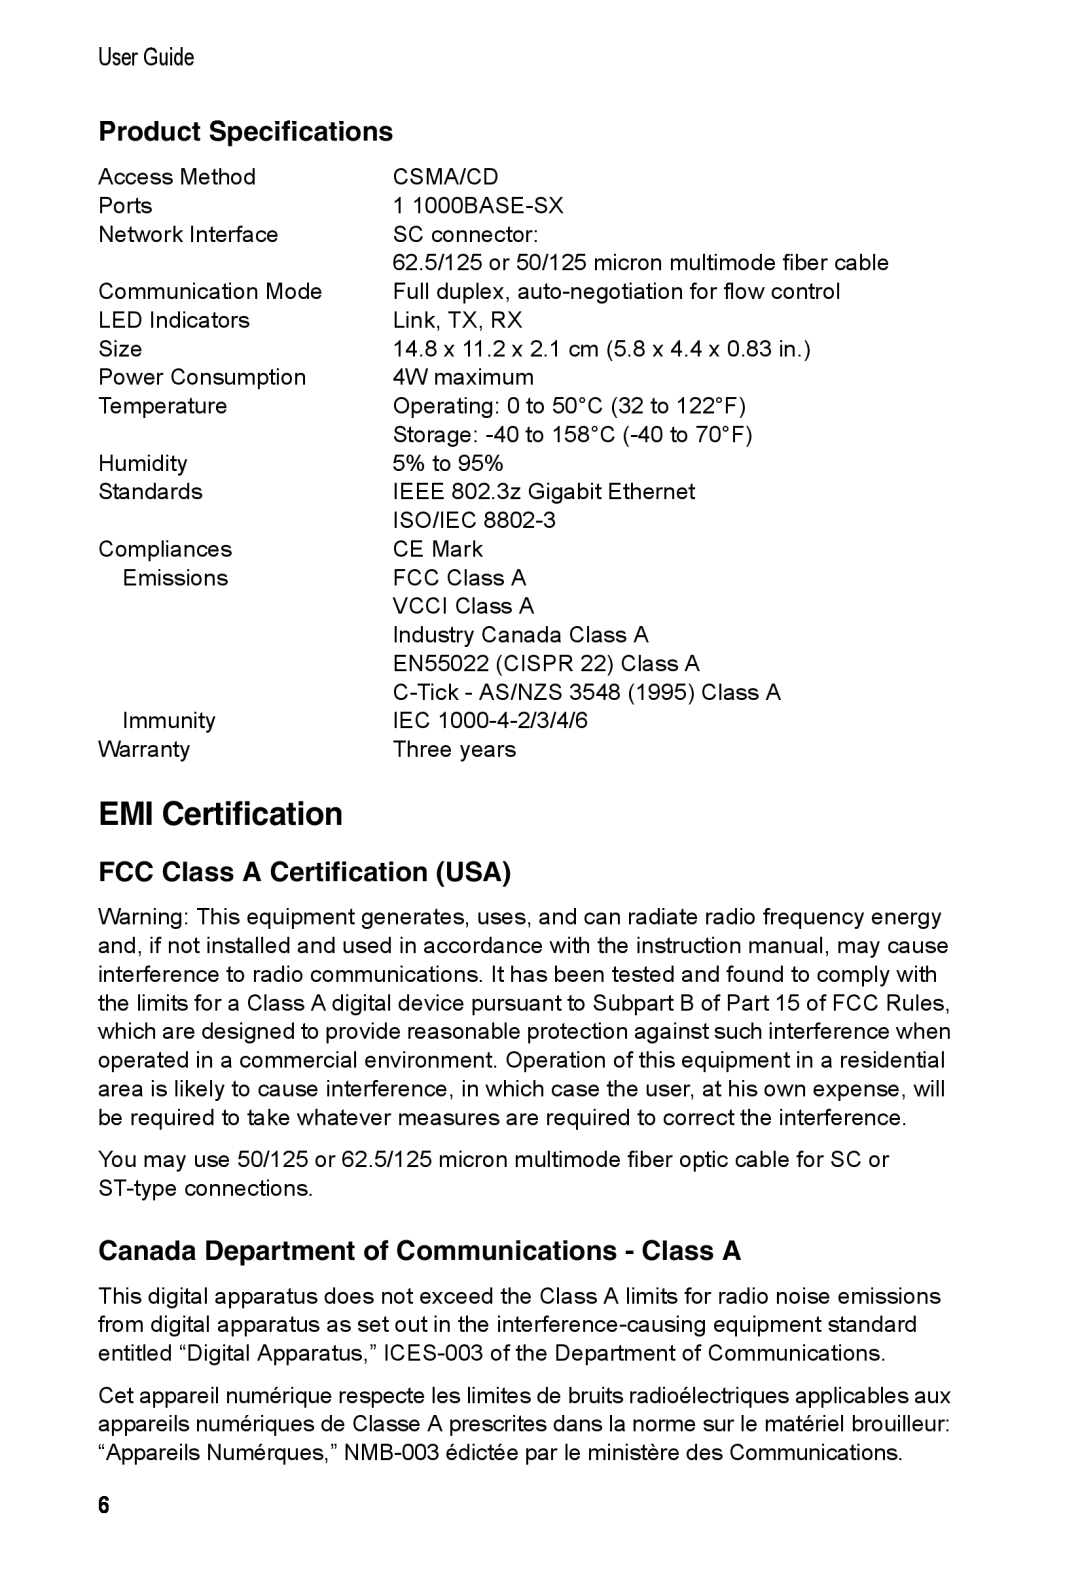 Accton Technology E062000-R01, EM4601-SX-SC manual EMI Certification, Product Specifications, FCC Class A Certification USA 